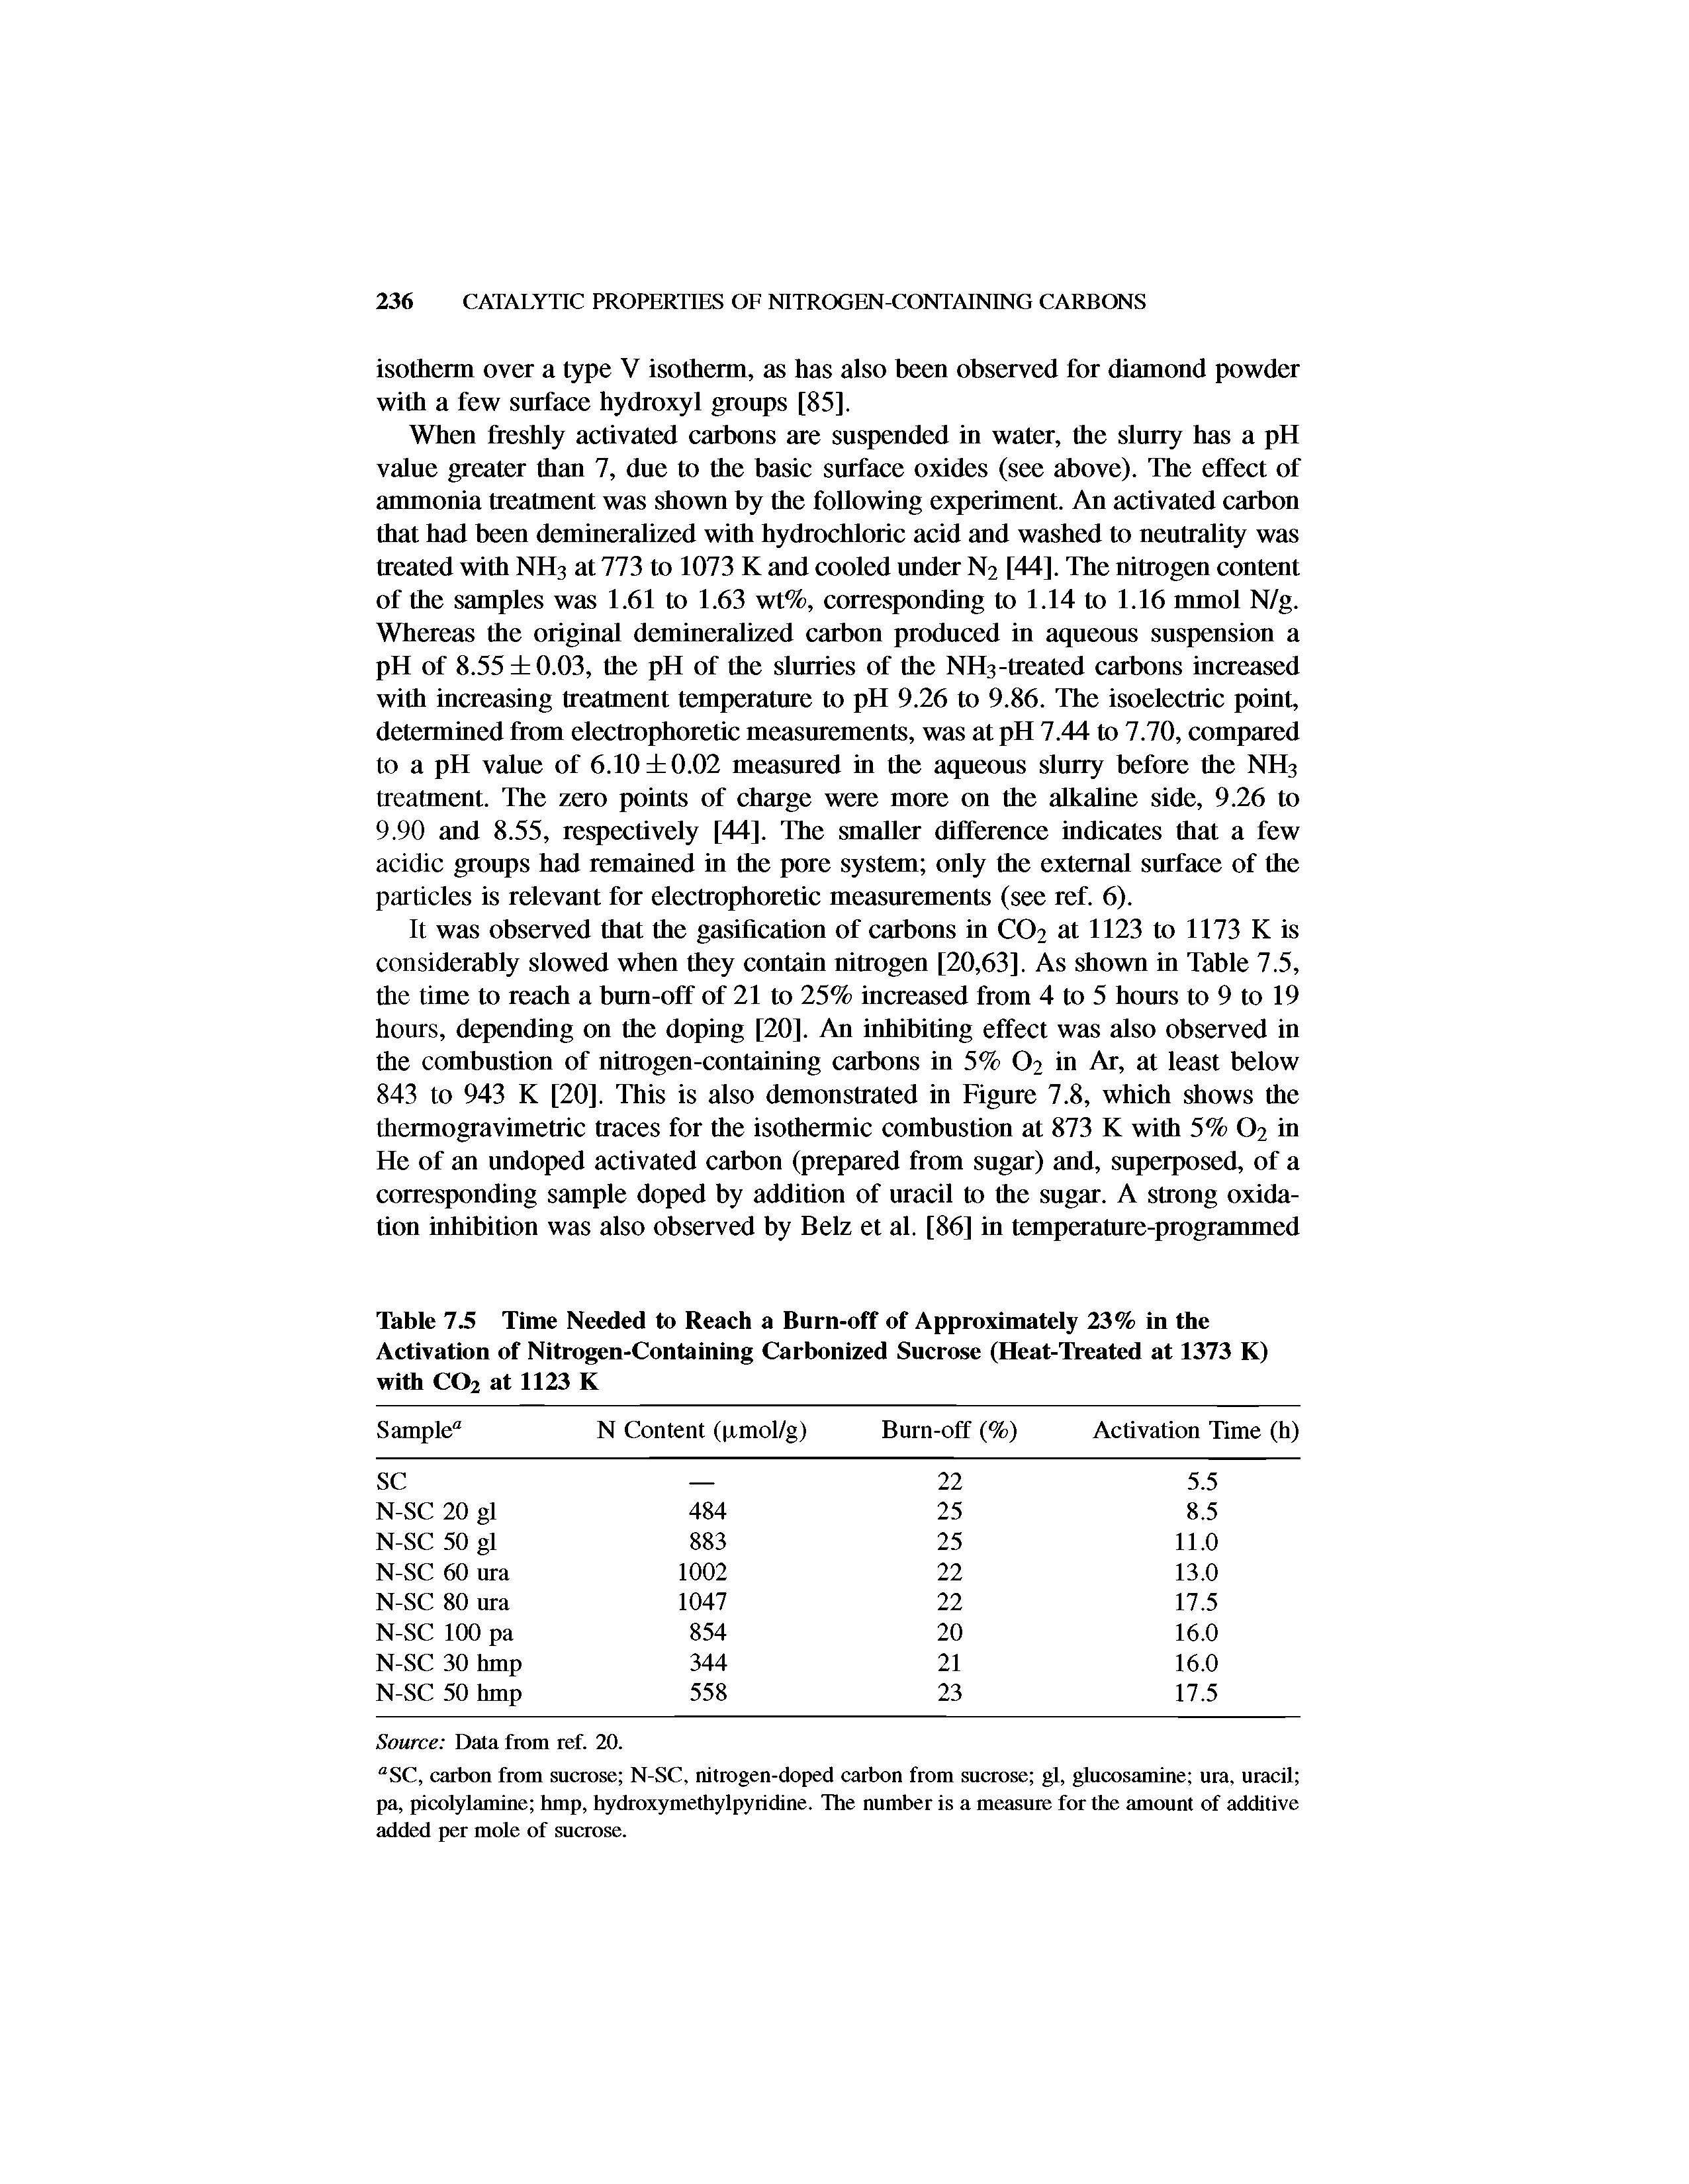 Table 7.5 Time Needed to Reach a Burn-off of Approximately 23% in the Activation of Nitrogen-Containing Carbonized Sucrose (Heat-Treated at 1373 K) with CO2 at 1123 K...